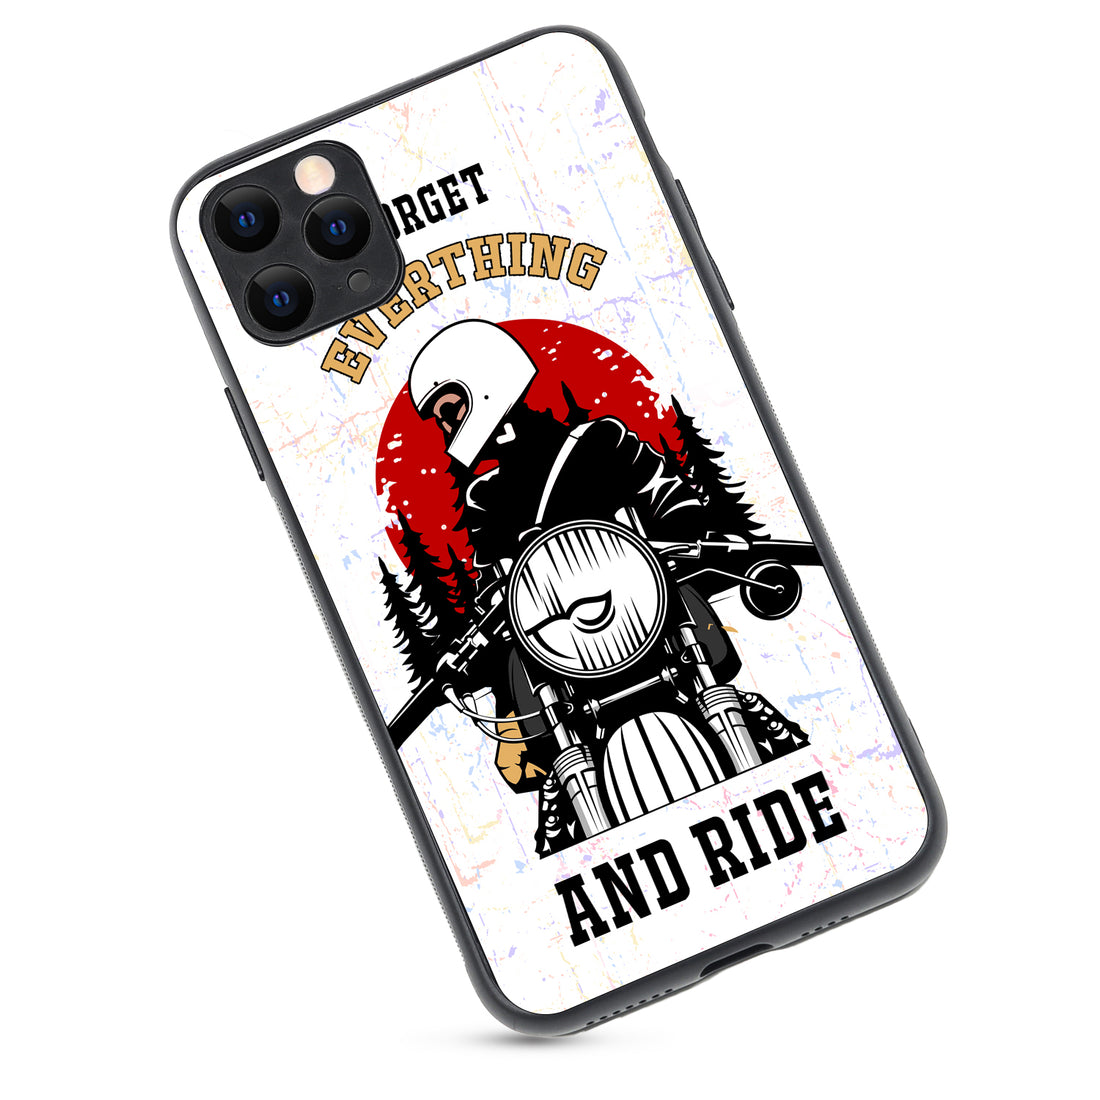 Forget Everything &amp; Ride Bike iPhone 11 Pro Max Case